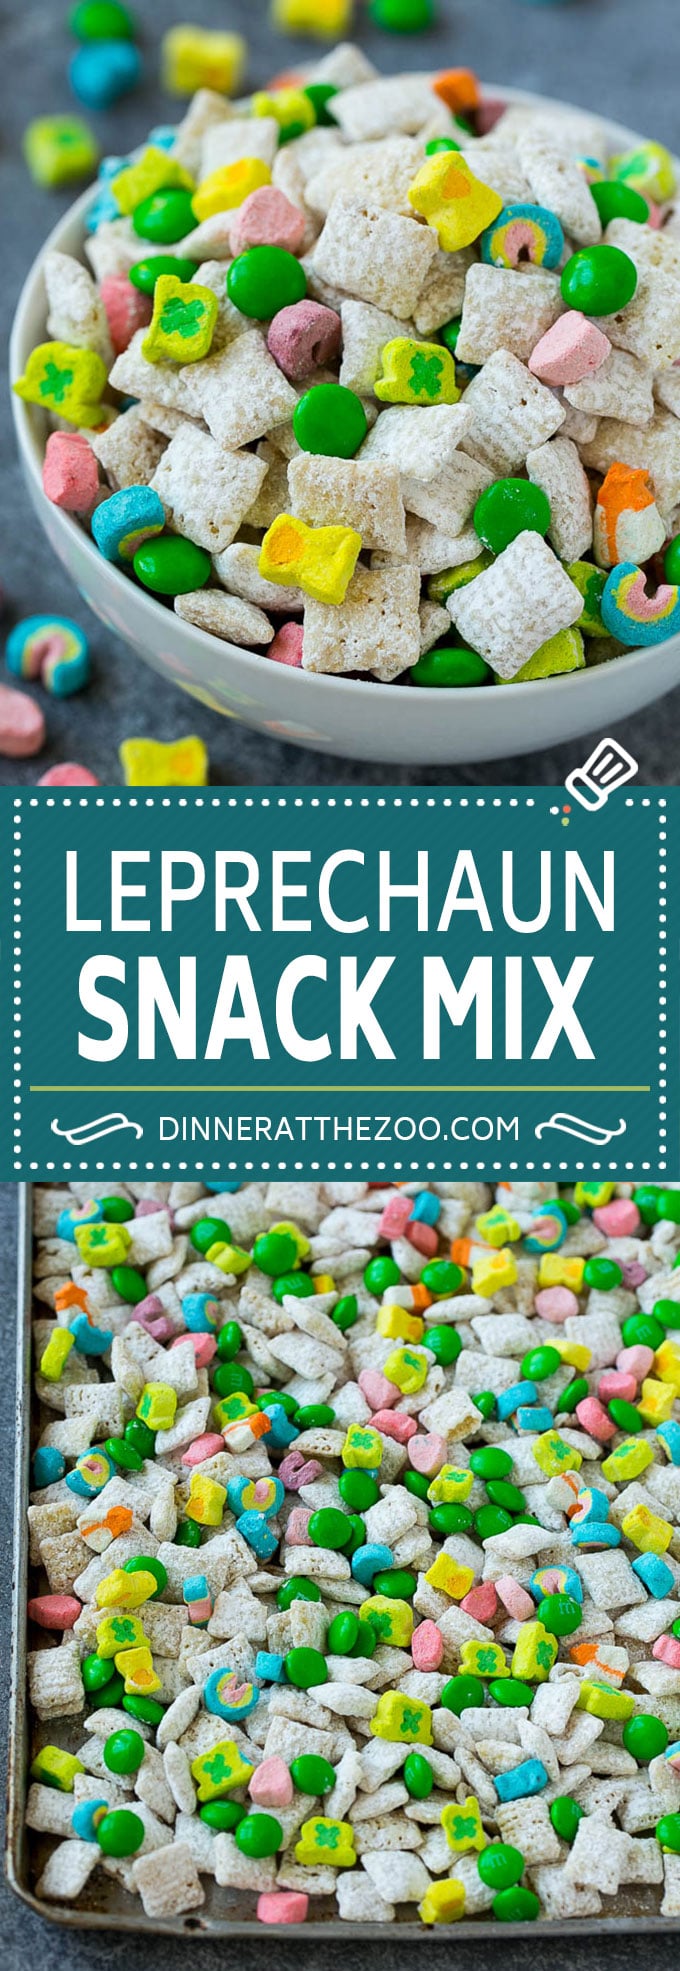 This leprechaun snack mix is a sweet blend of white chocolate muddy buddies, rainbow marshmallows and green M&M candies.